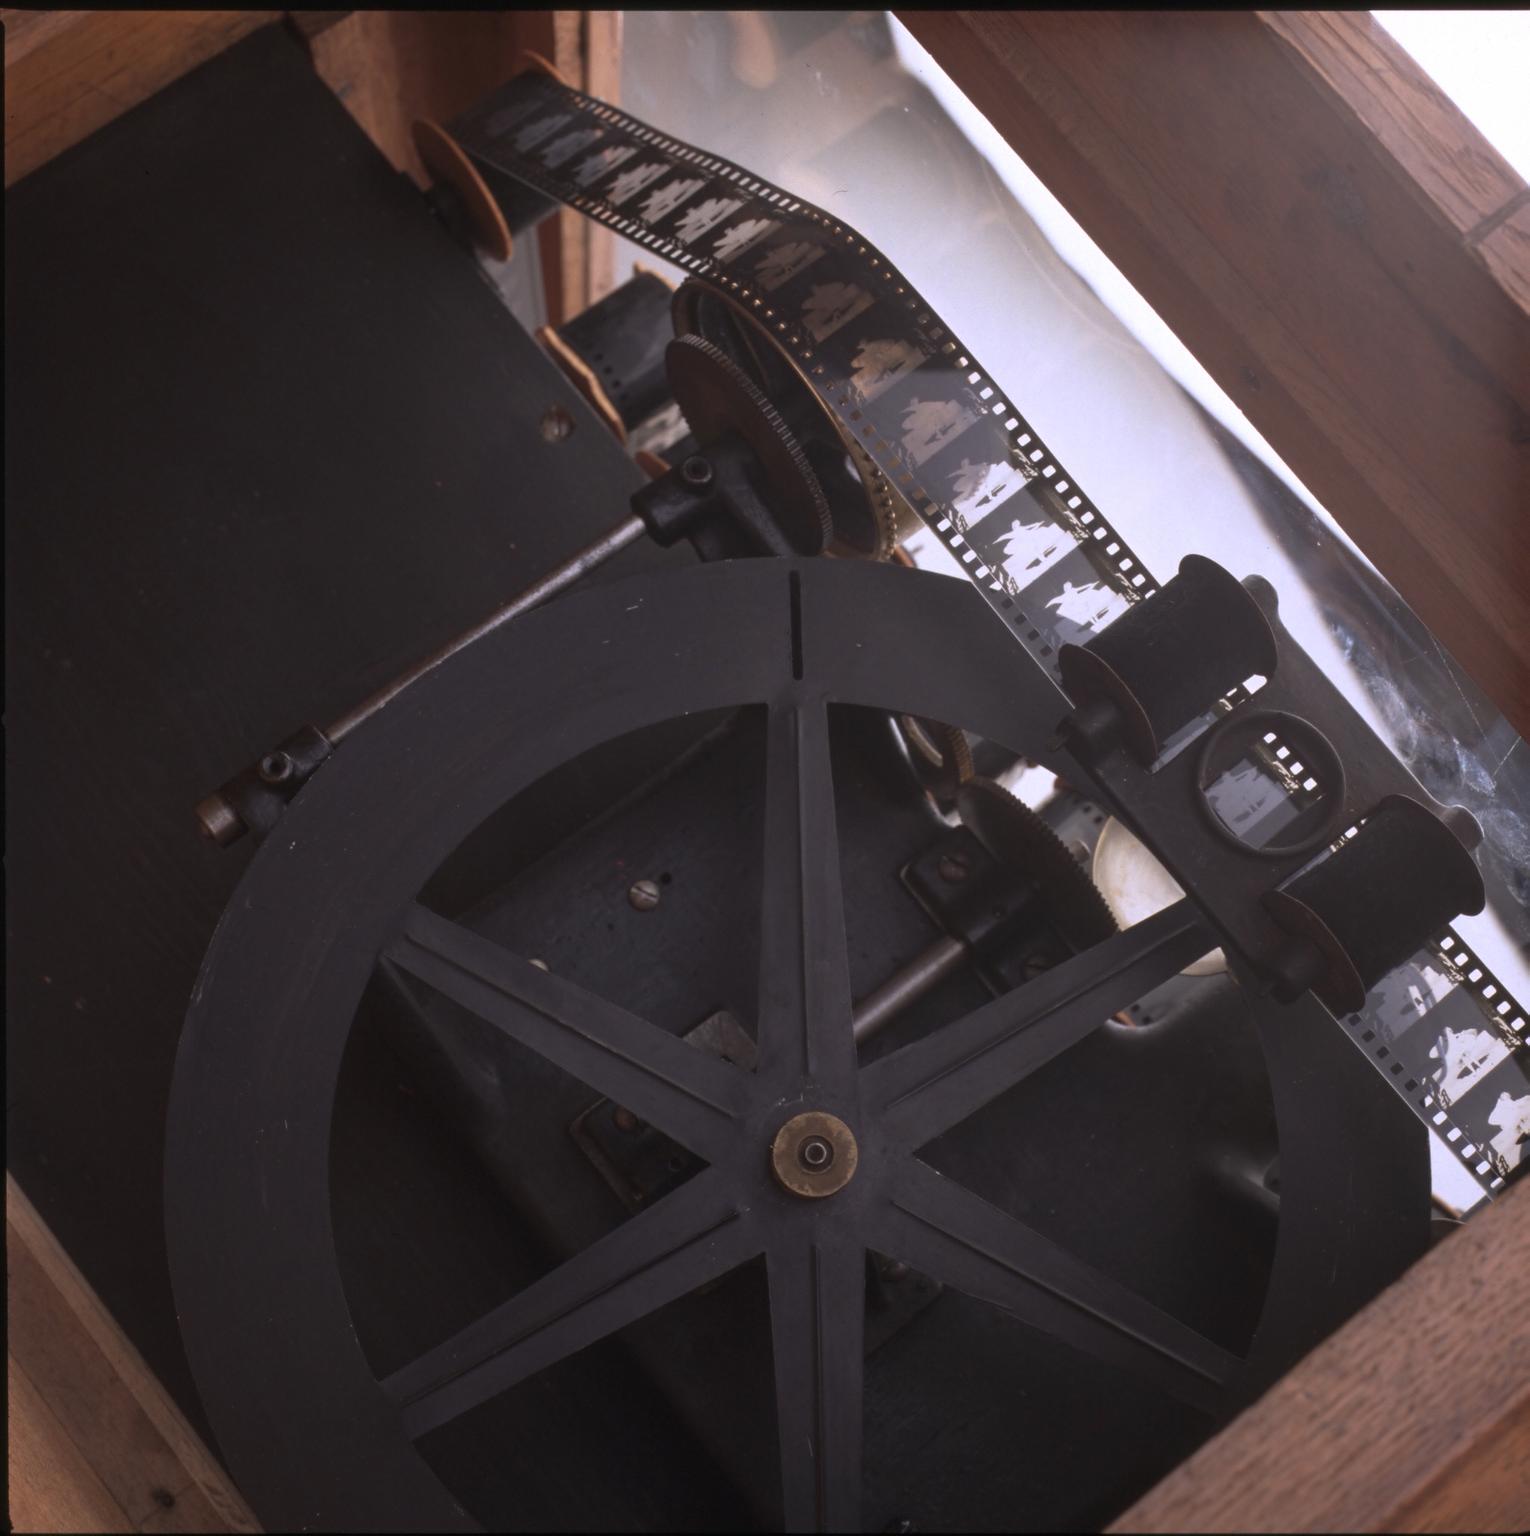 Edison Kinetoscope, close-up of interior from top